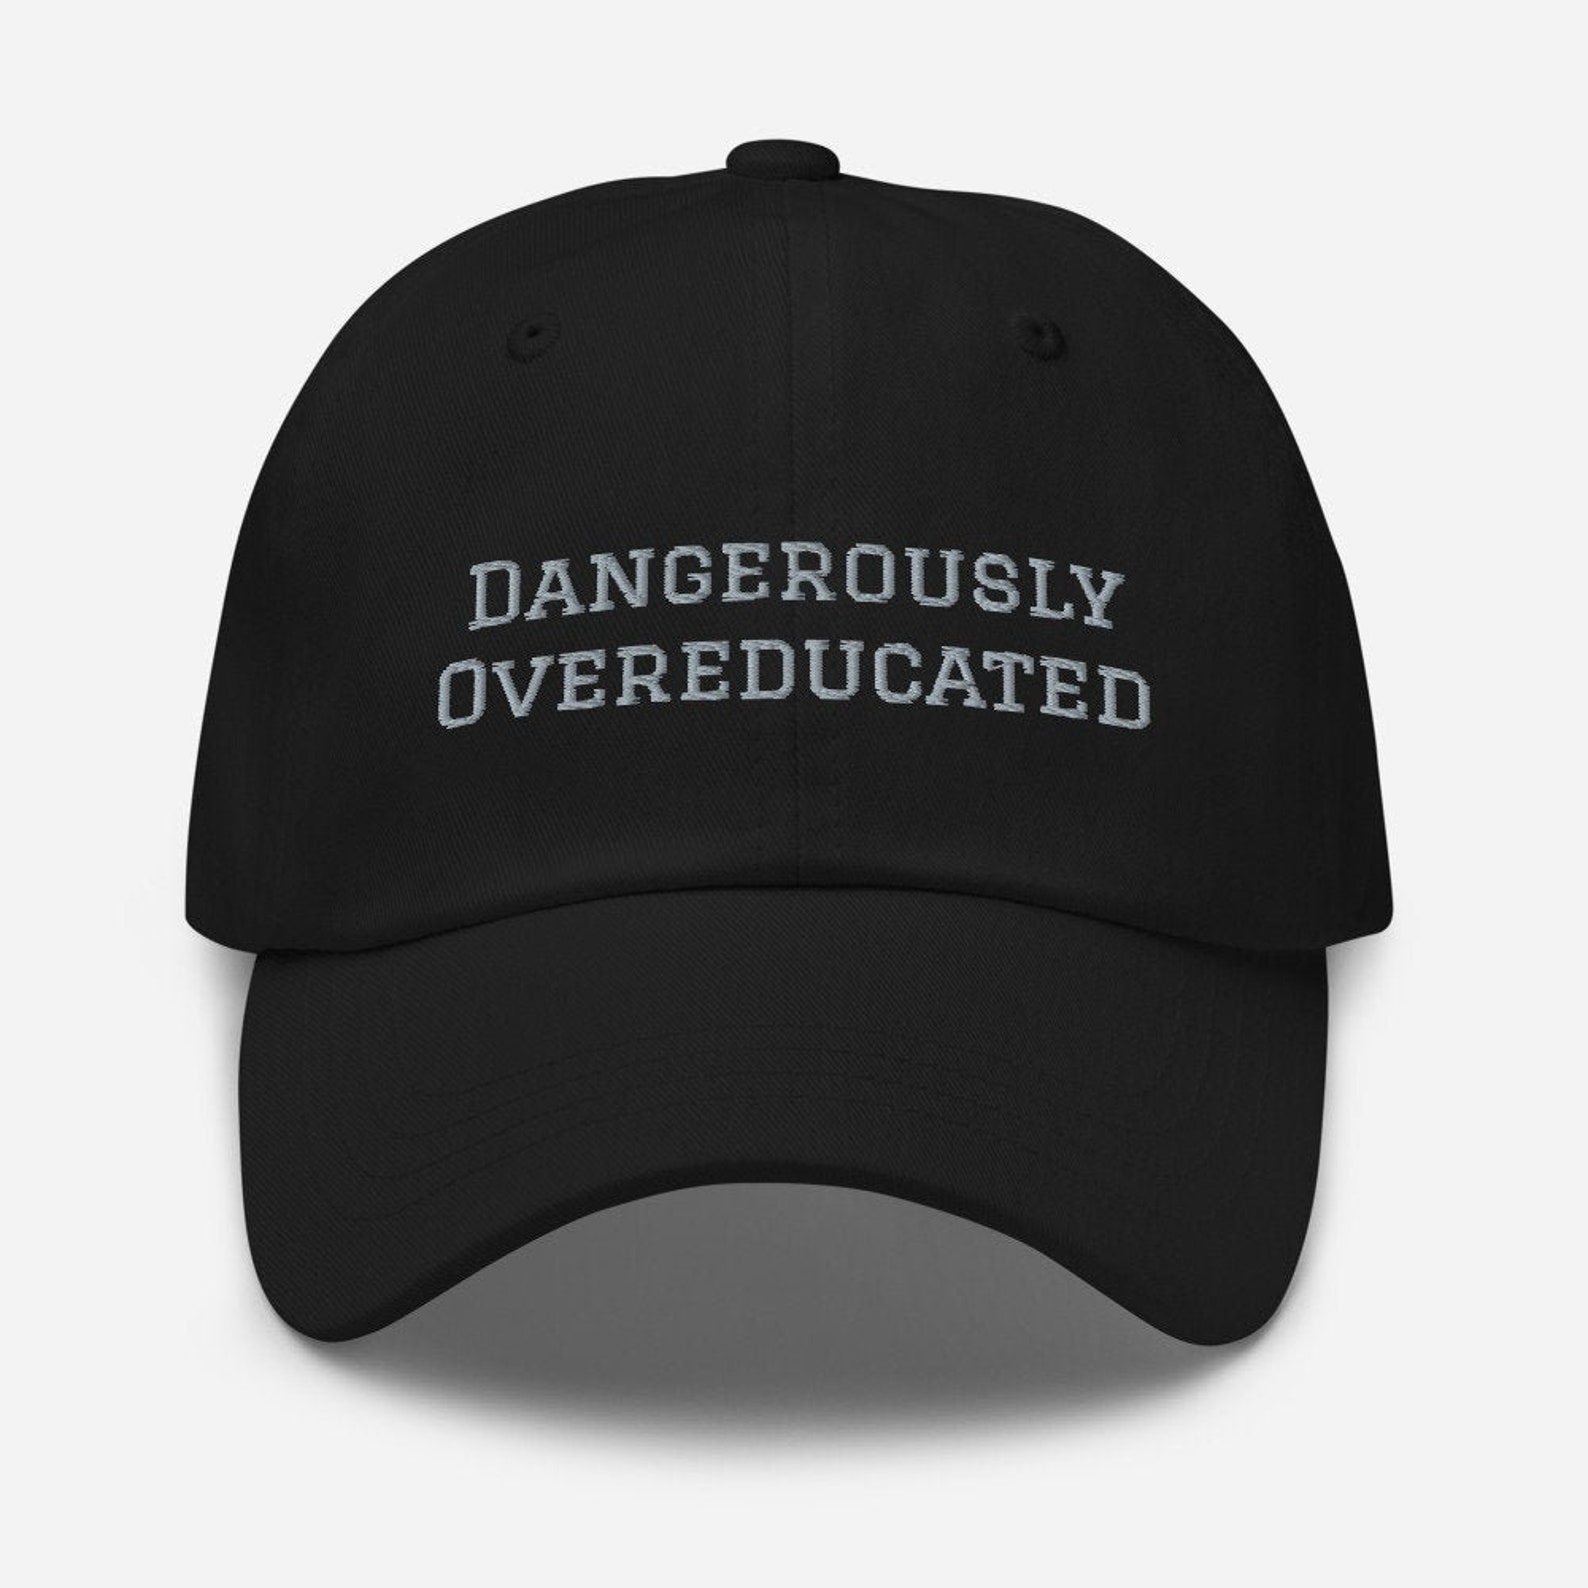 Dangerously overeducated embroidered hat unisex phd hat | Etsy